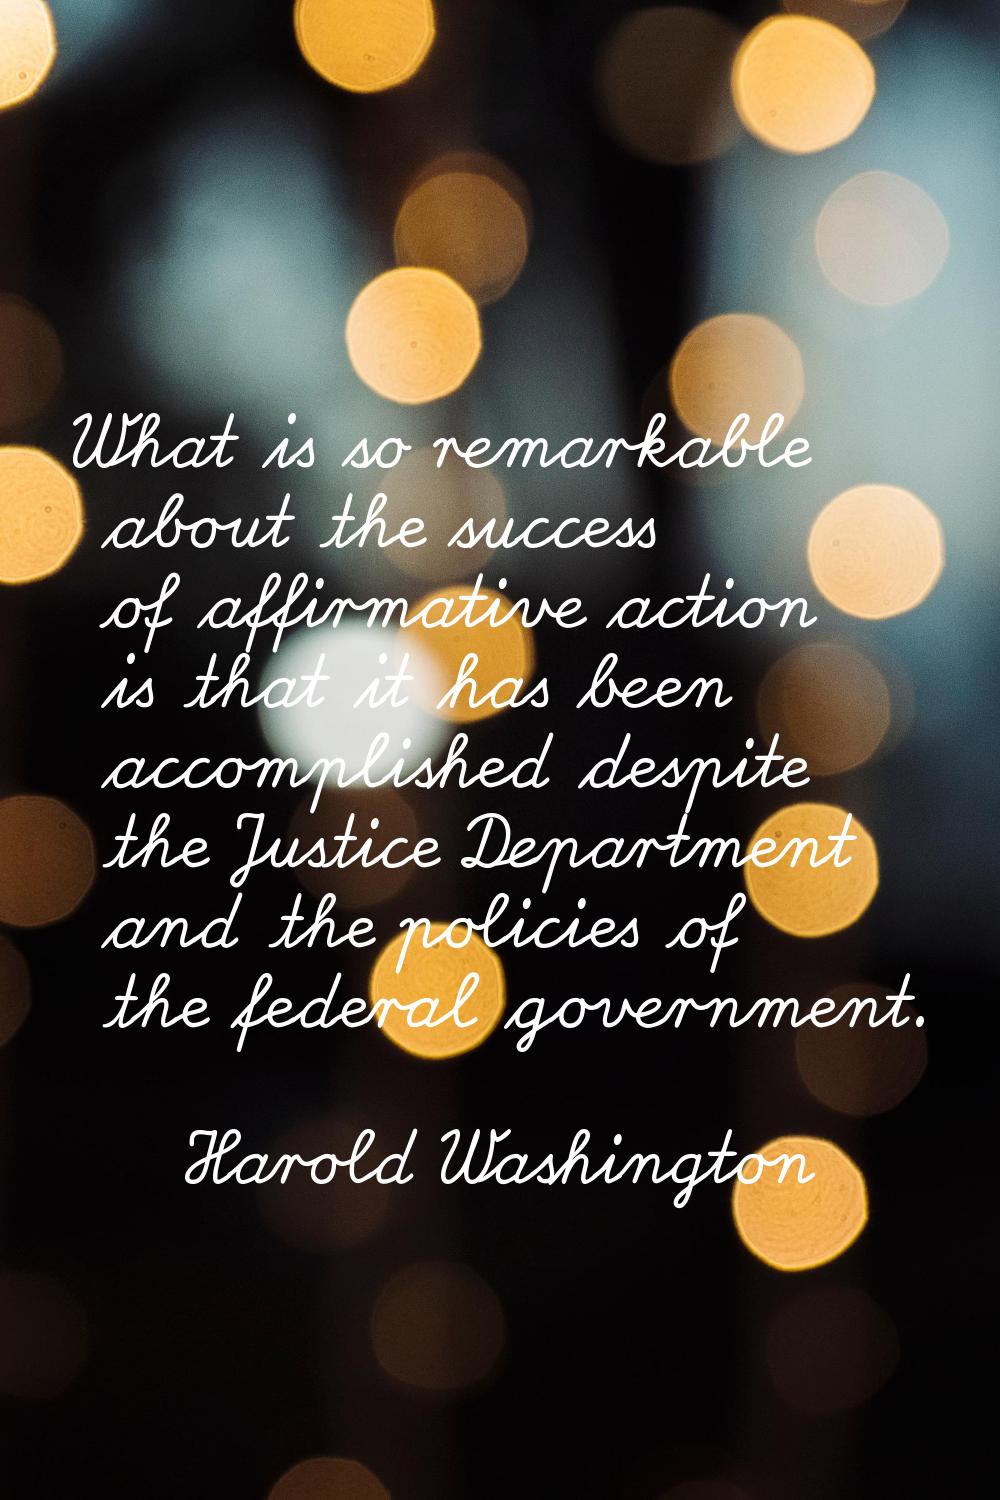 What is so remarkable about the success of affirmative action is that it has been accomplished desp